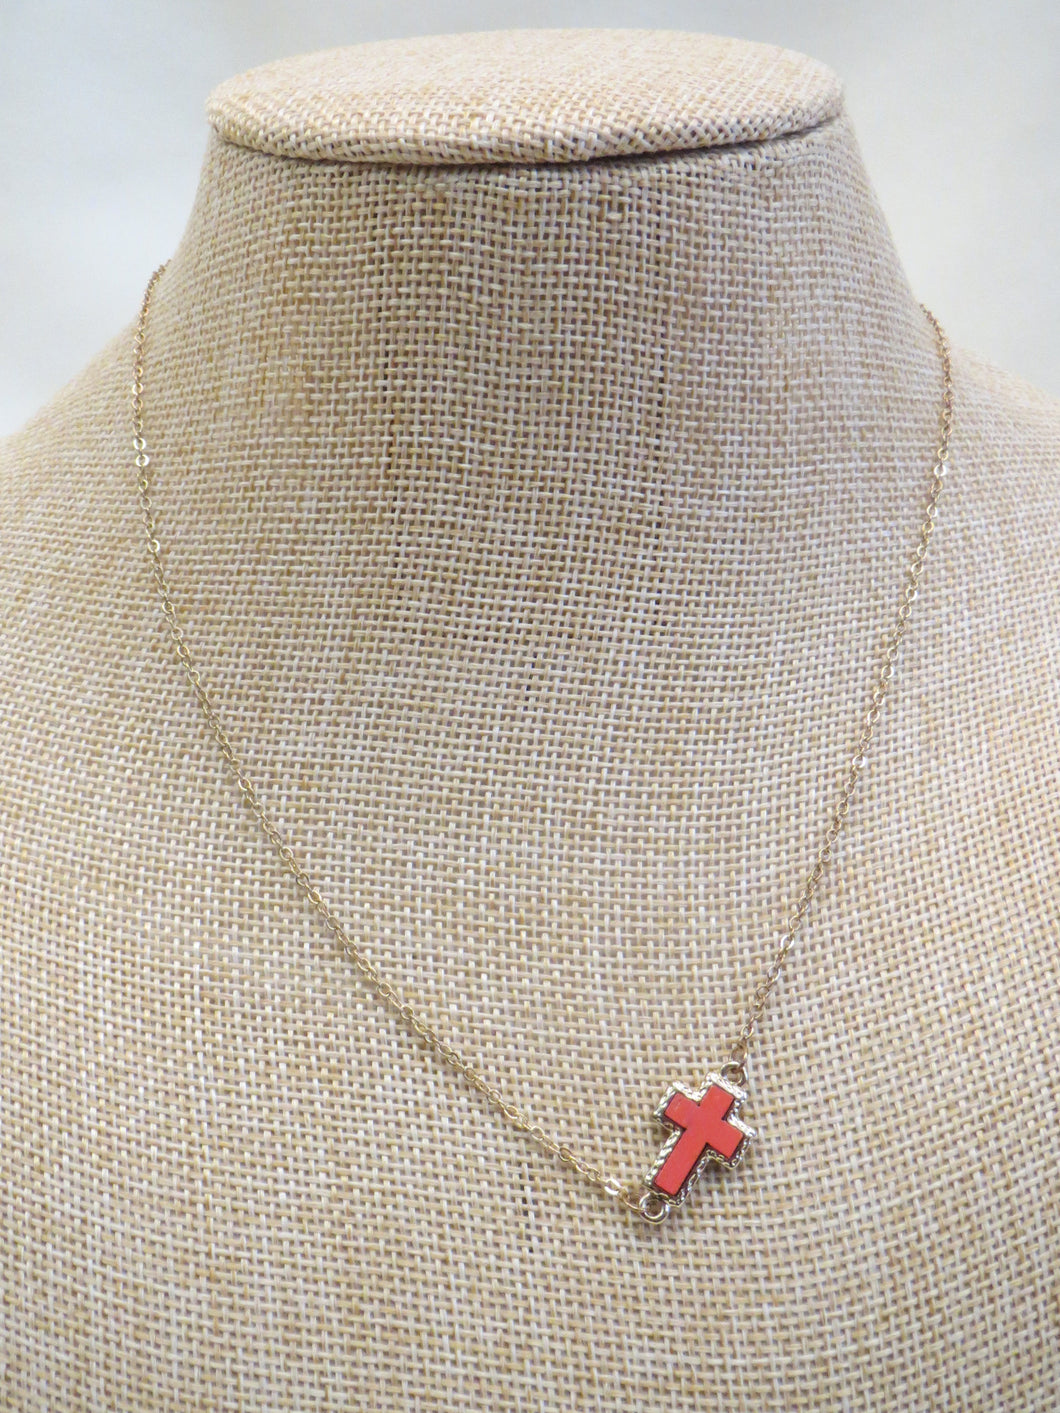 ADO | Coral Side Cross on Gold Chain Necklace - All Decd Out